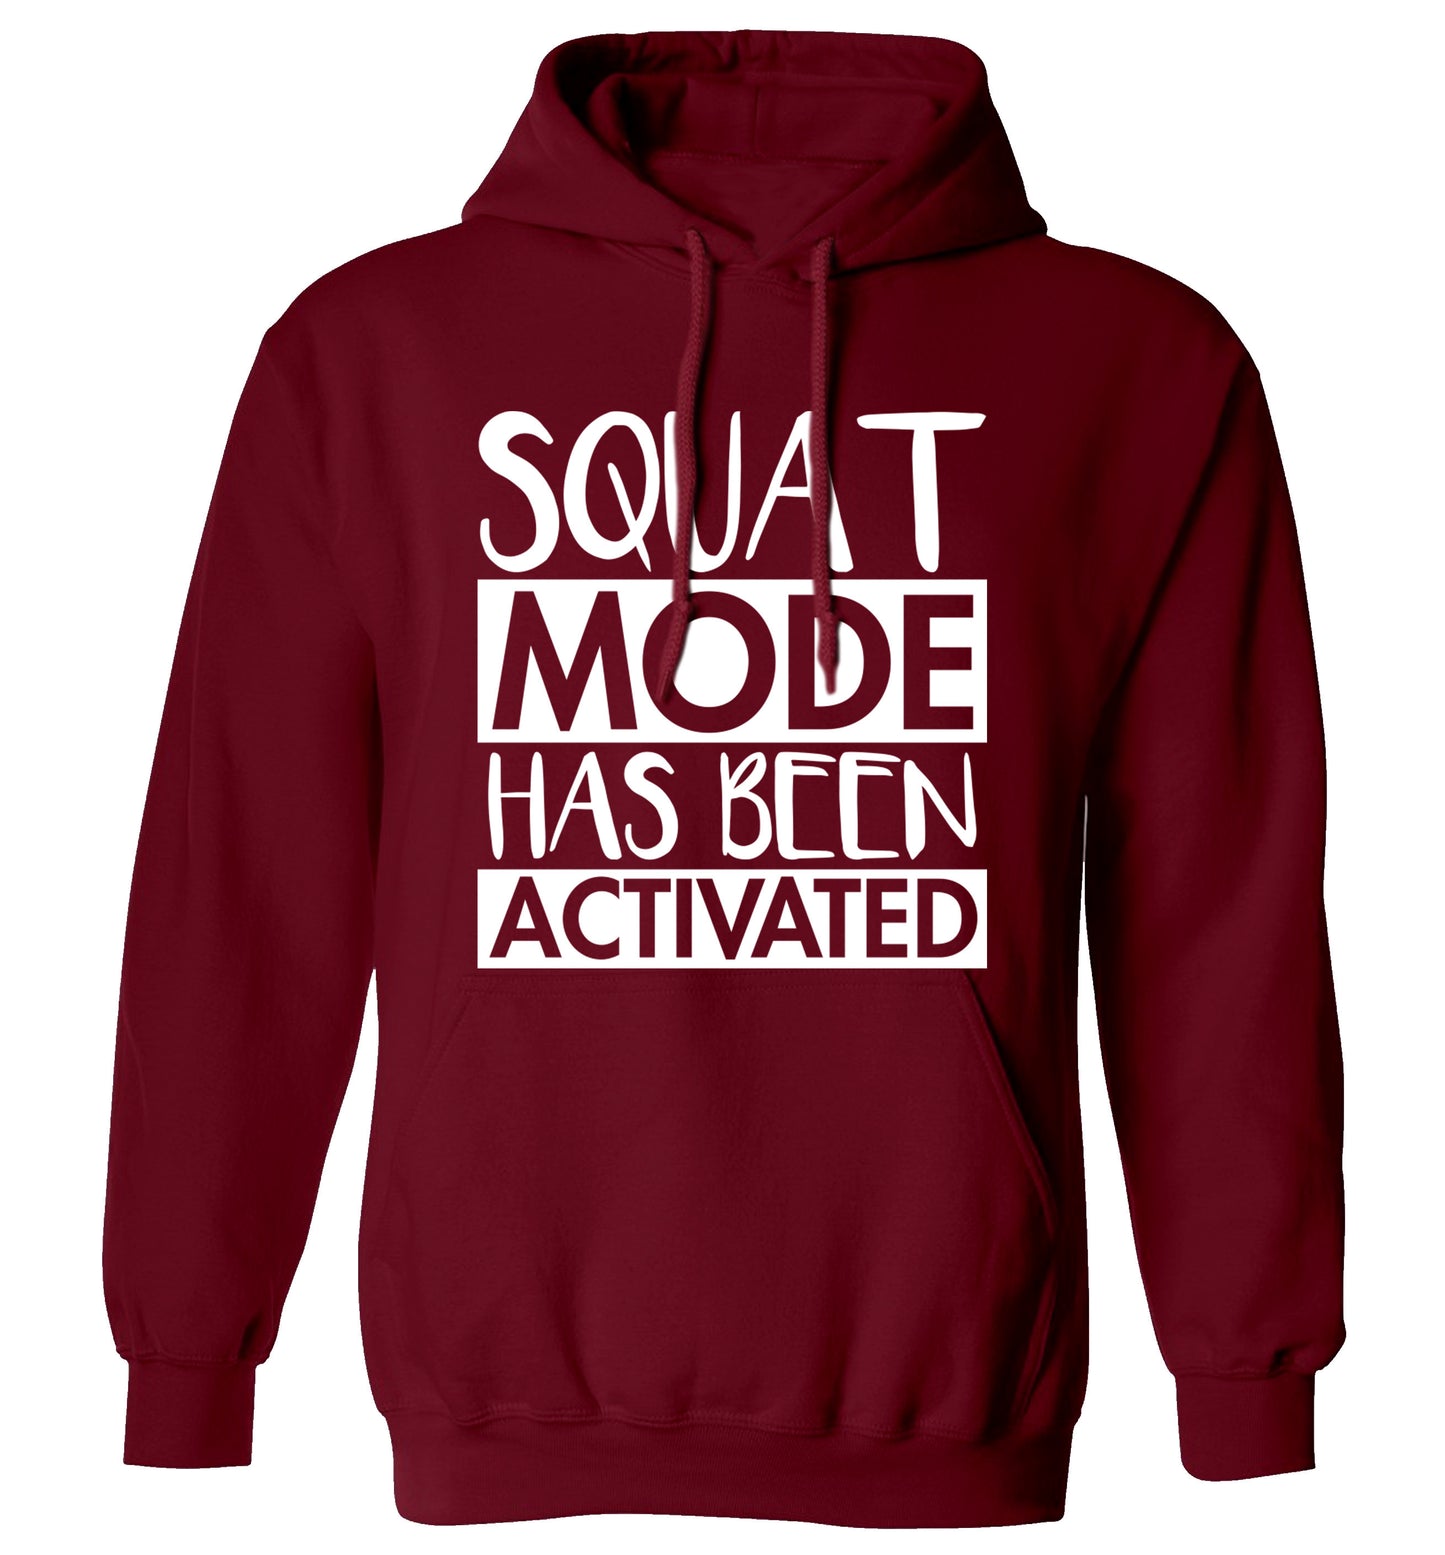 Squat mode activated adults unisex maroon hoodie 2XL